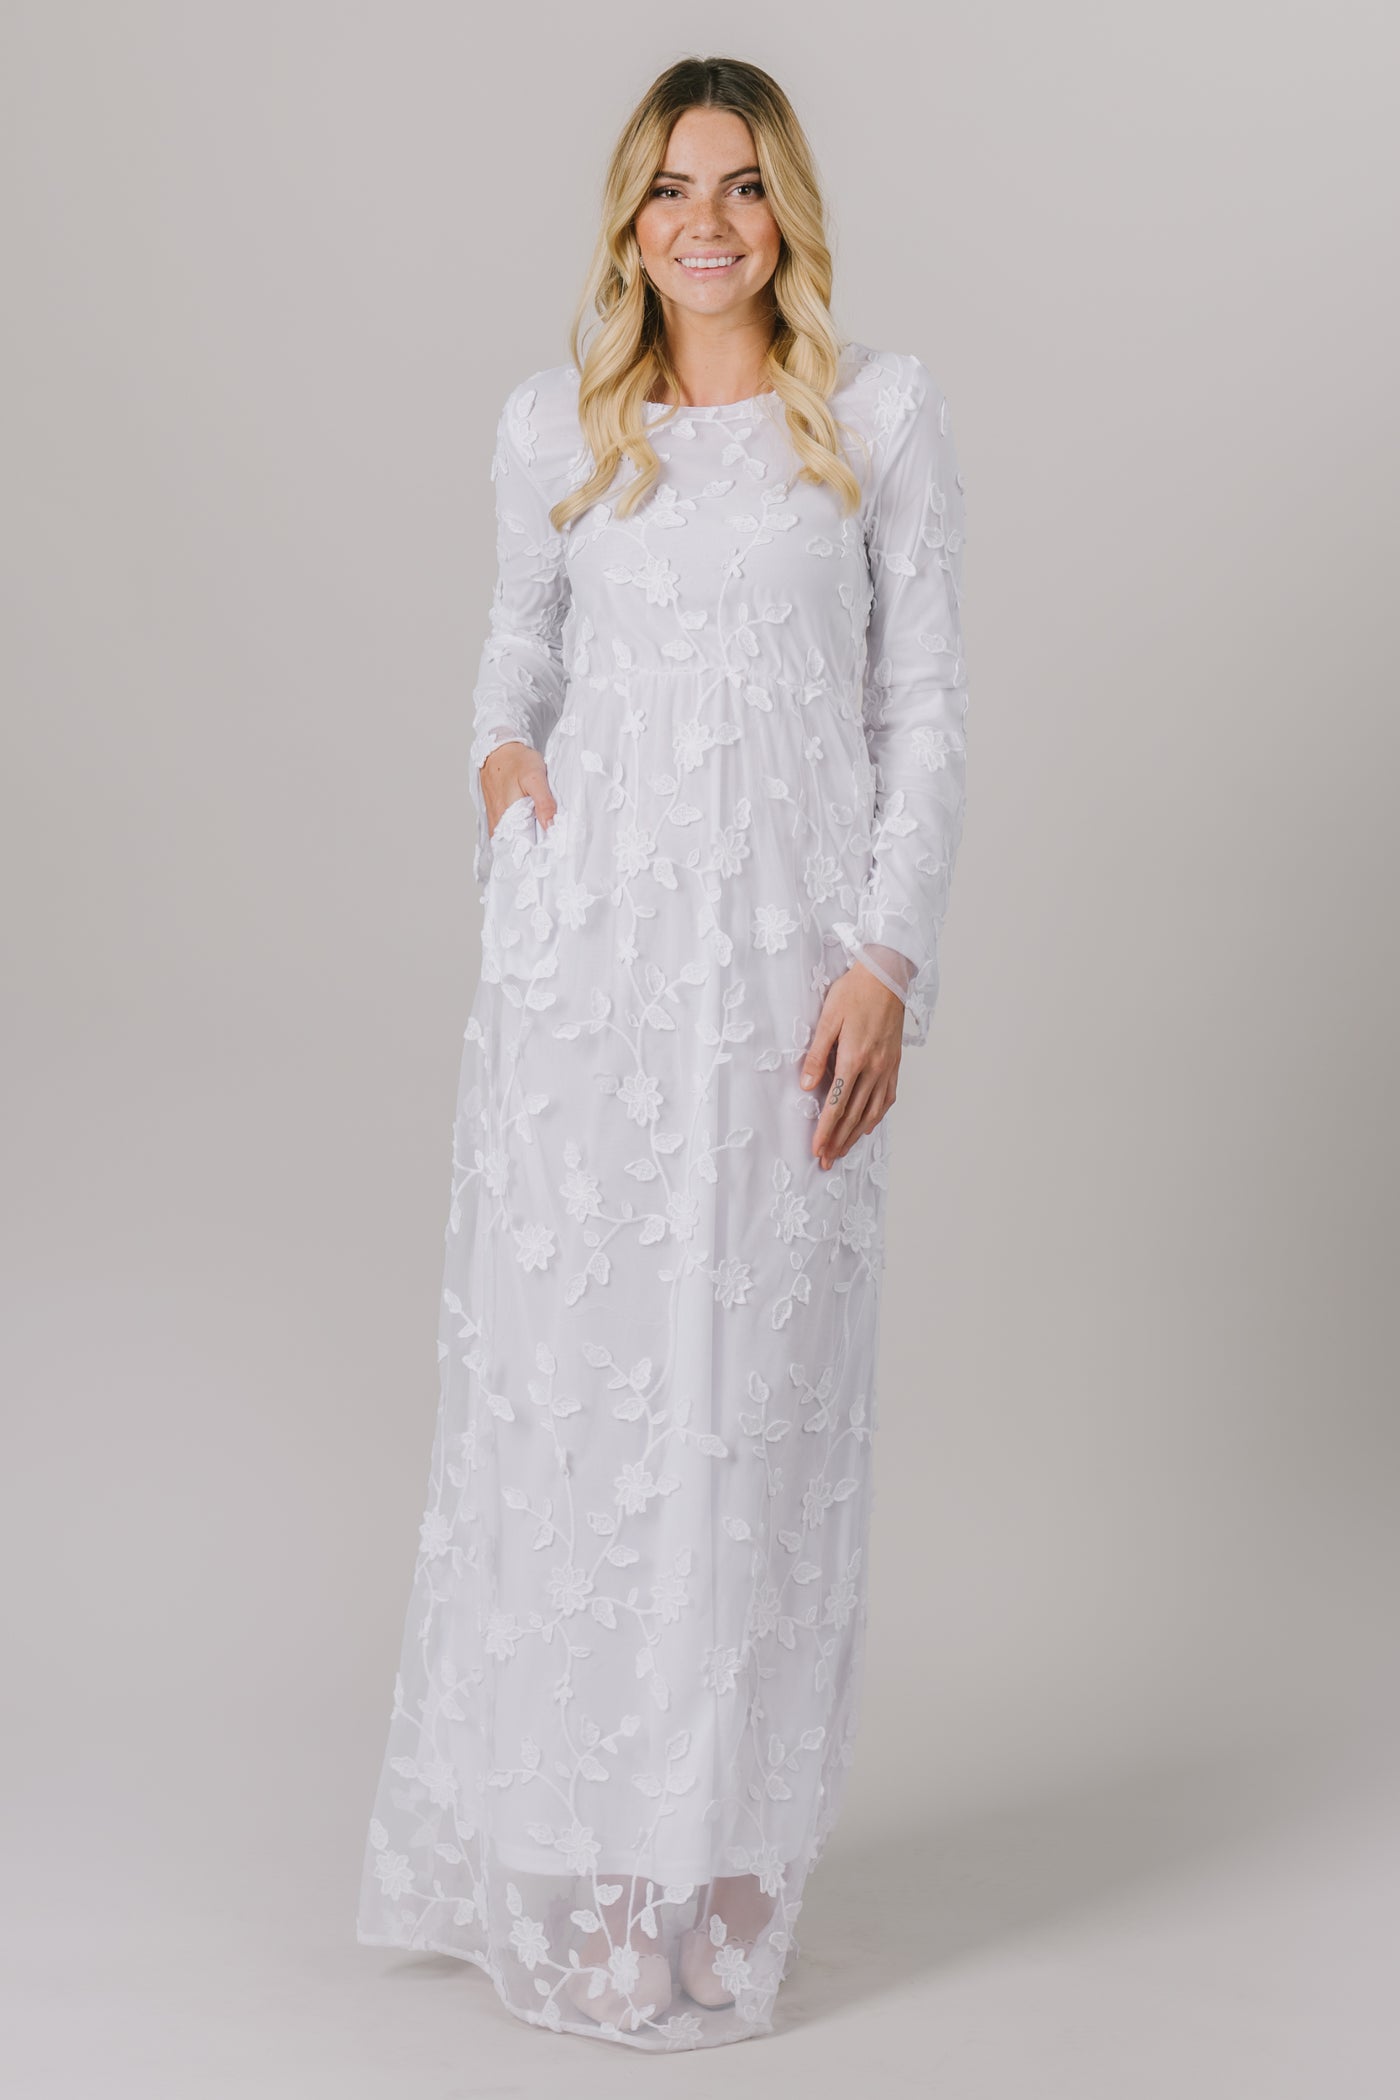 This LDS temple dress features a fully lined, lovely floral lace with a cinched waistband and gorgeous flowy long sleeves. It includes two functional pockets.